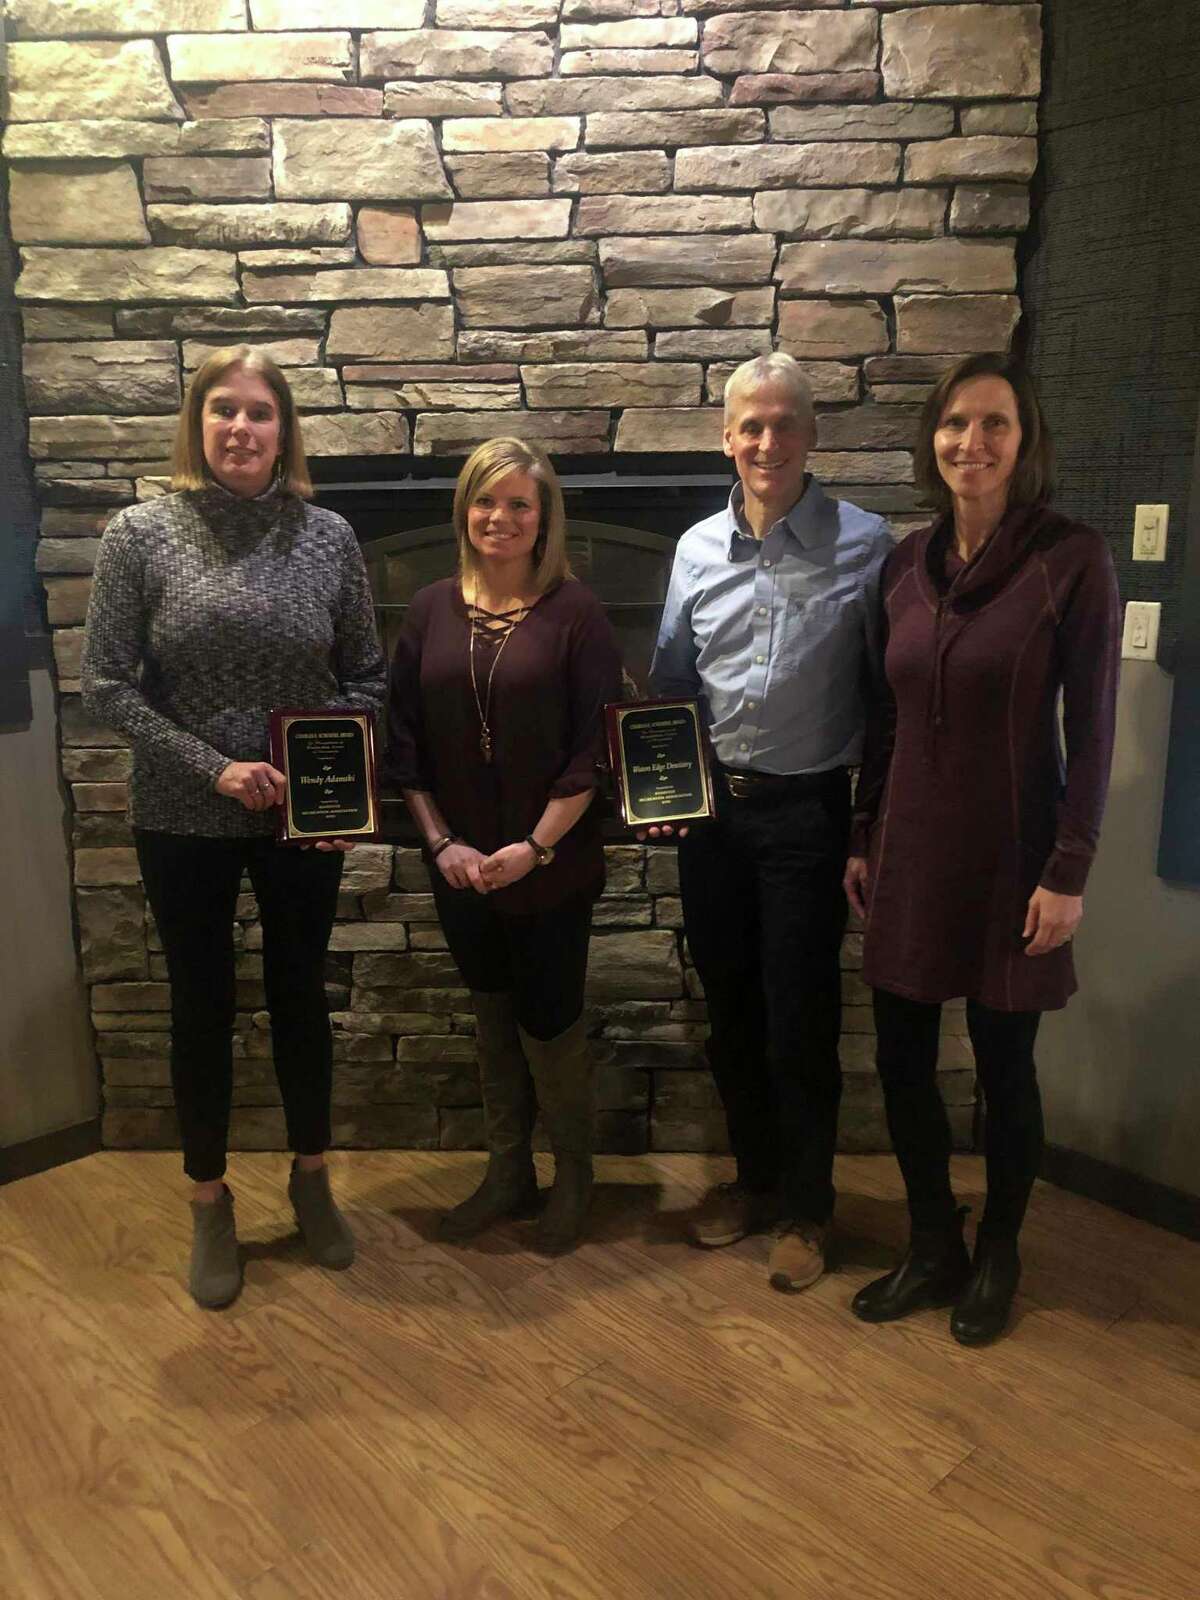 Each year, the Manistee Recreation Association presents the Charles E. Schoedel outstanding award to an individual and an organization. Pictured (from left to right) are Wendy Adamski (individual award winner), MRA executive director Stephanie Carpenter, and Geoff and Mary Paine of Water's Edge Dentistry (organization award winner). (Courtesy photo)